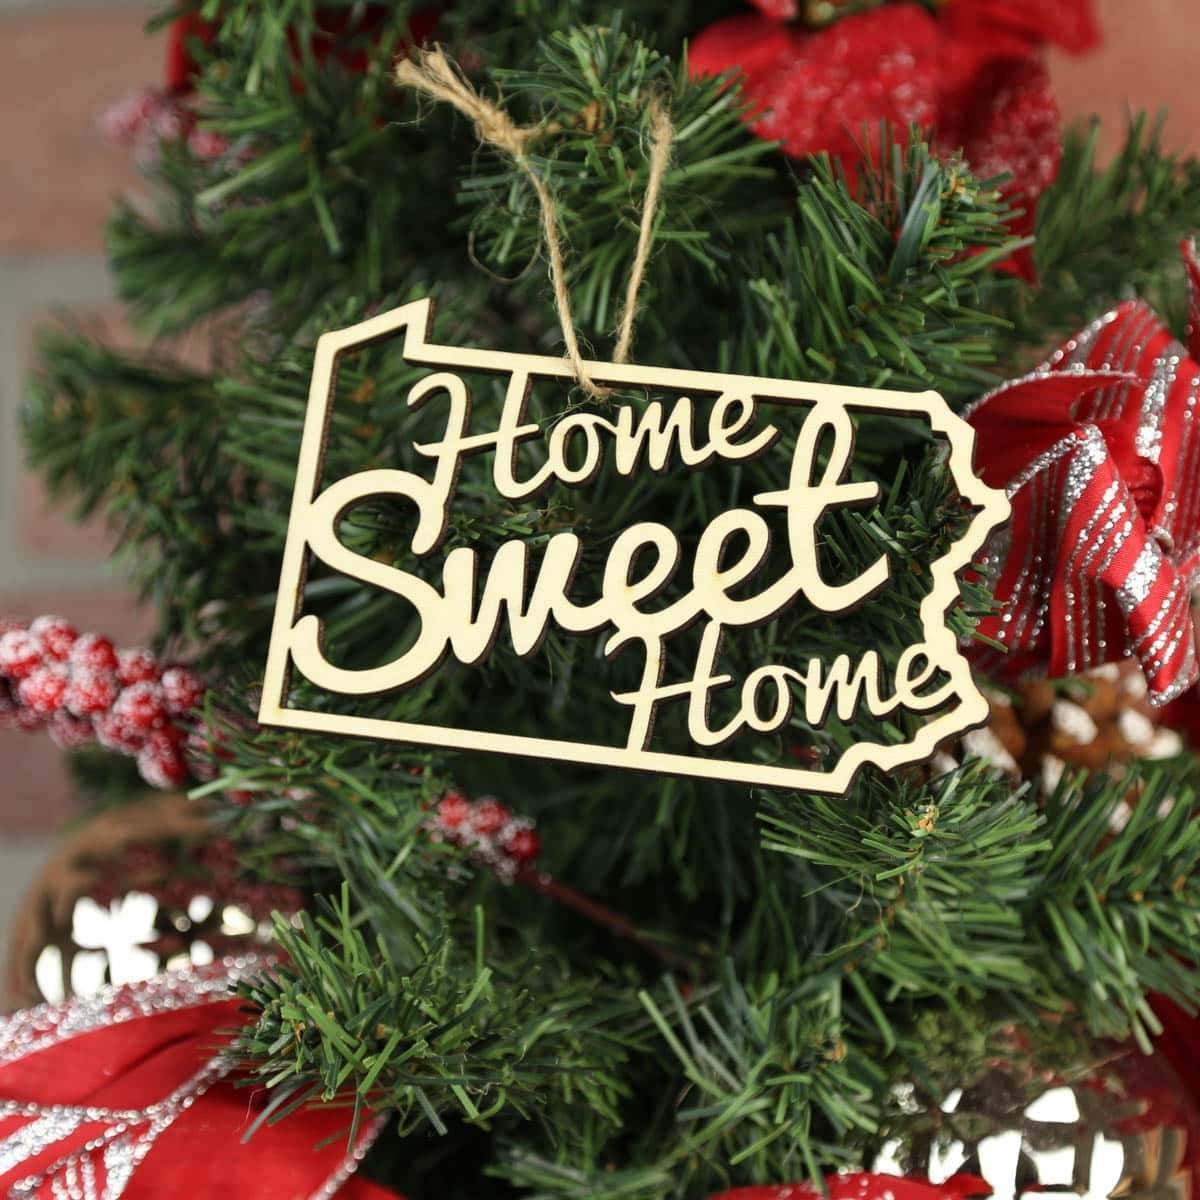 Torched Products Ornaments Pennsylvania Home Sweet Home Ornaments (781221527669)